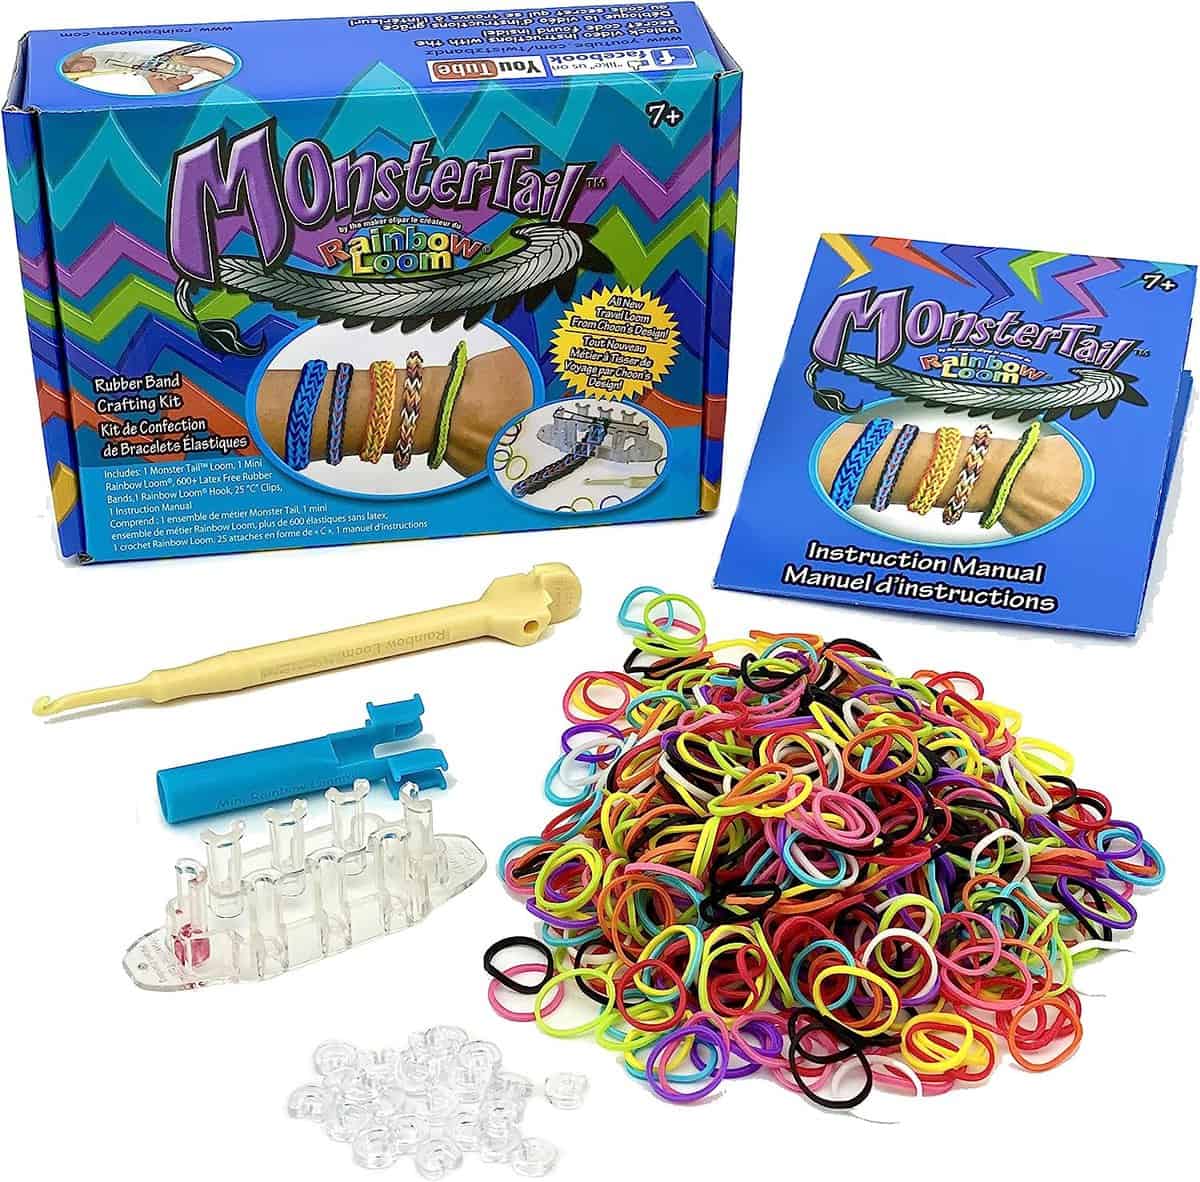 Rainbow Loom® Monster Tail™ Kit Features Compact Loom and Case, Makes Monster Sized Bracelets, Easy for Travel, Includes Exclusive Monster Tail Loom, and 2 Bracelet Instructions for Boys and Girls 7+.